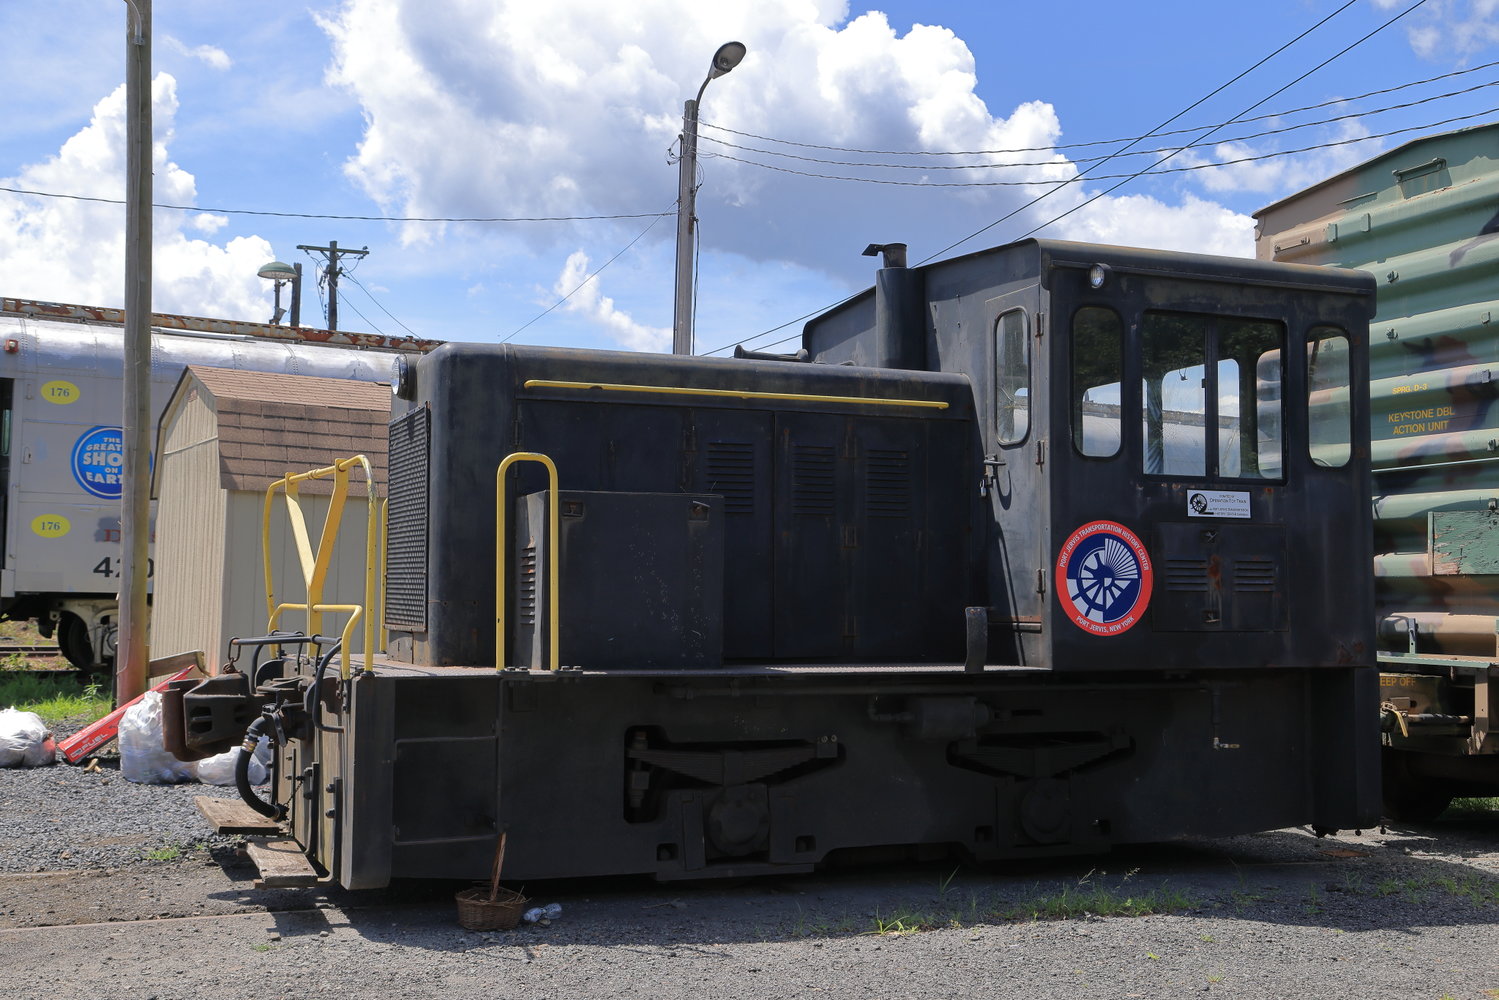 This locomotive, built in 1955 for Orange and Rockland Power Company (O&R), went through several owners before being donated to Operation Toy Train in October of 2021 for use as a Port Jervis yard switcher. Its small size means that it will fit on the 115-foot-long turntable with any other piece of rail equipment in the collection. The locomotive was donated to the Port Jervis Transportation History Center in February of 2022. The engine will be restored to its appearance in the O&R days, representing the presence of a significant Port Jervis industry.